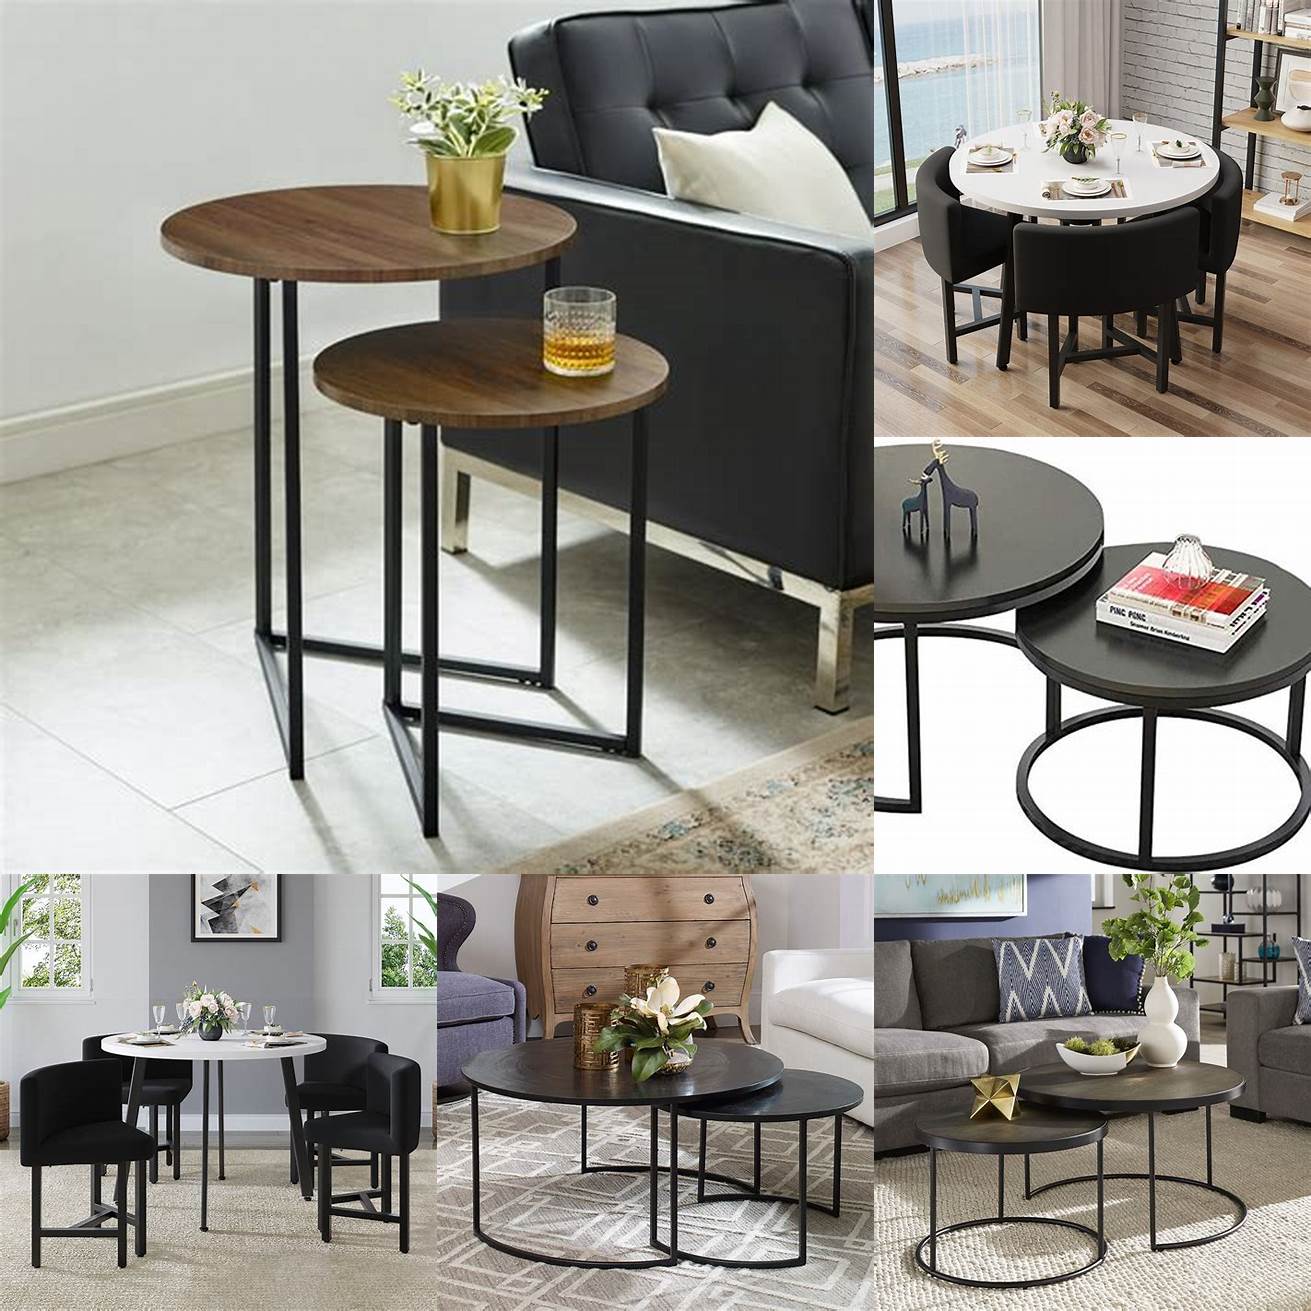 Black nested round kitchen tables that can be easily stored when not in use